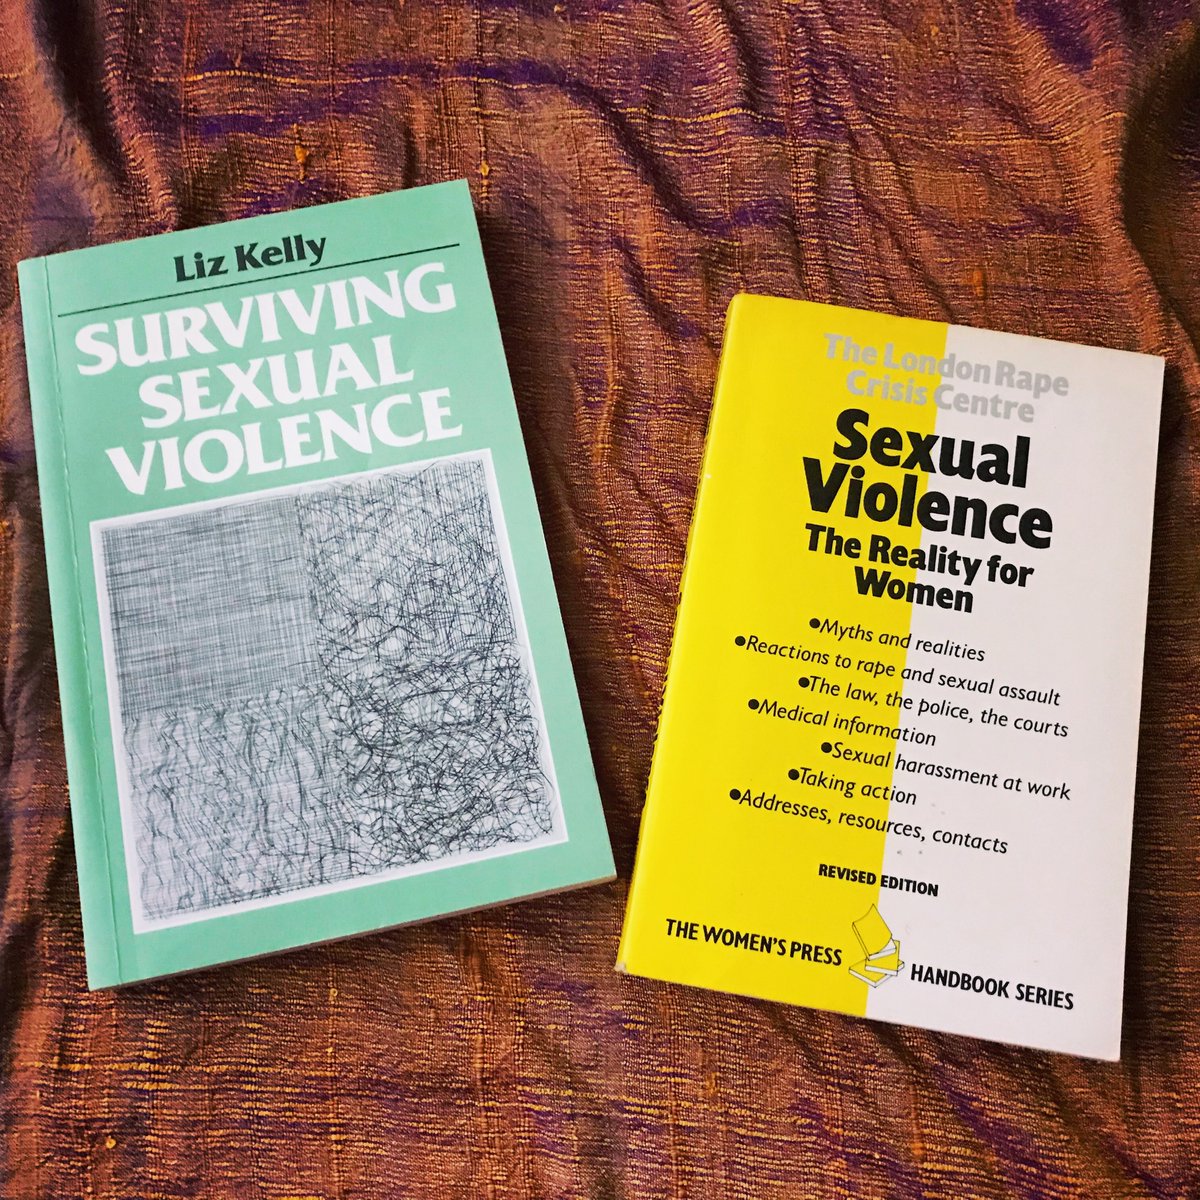  Surviving Sexual Violence, by  @ProfLizKelly  Sexual Violence: The Reality for Women, by The London Rape Crisis CentreTwo groundbreaking texts on women’s experiences of men’s sexual violence. Helpful resources for victim-survivors. #OurFeministLibrary